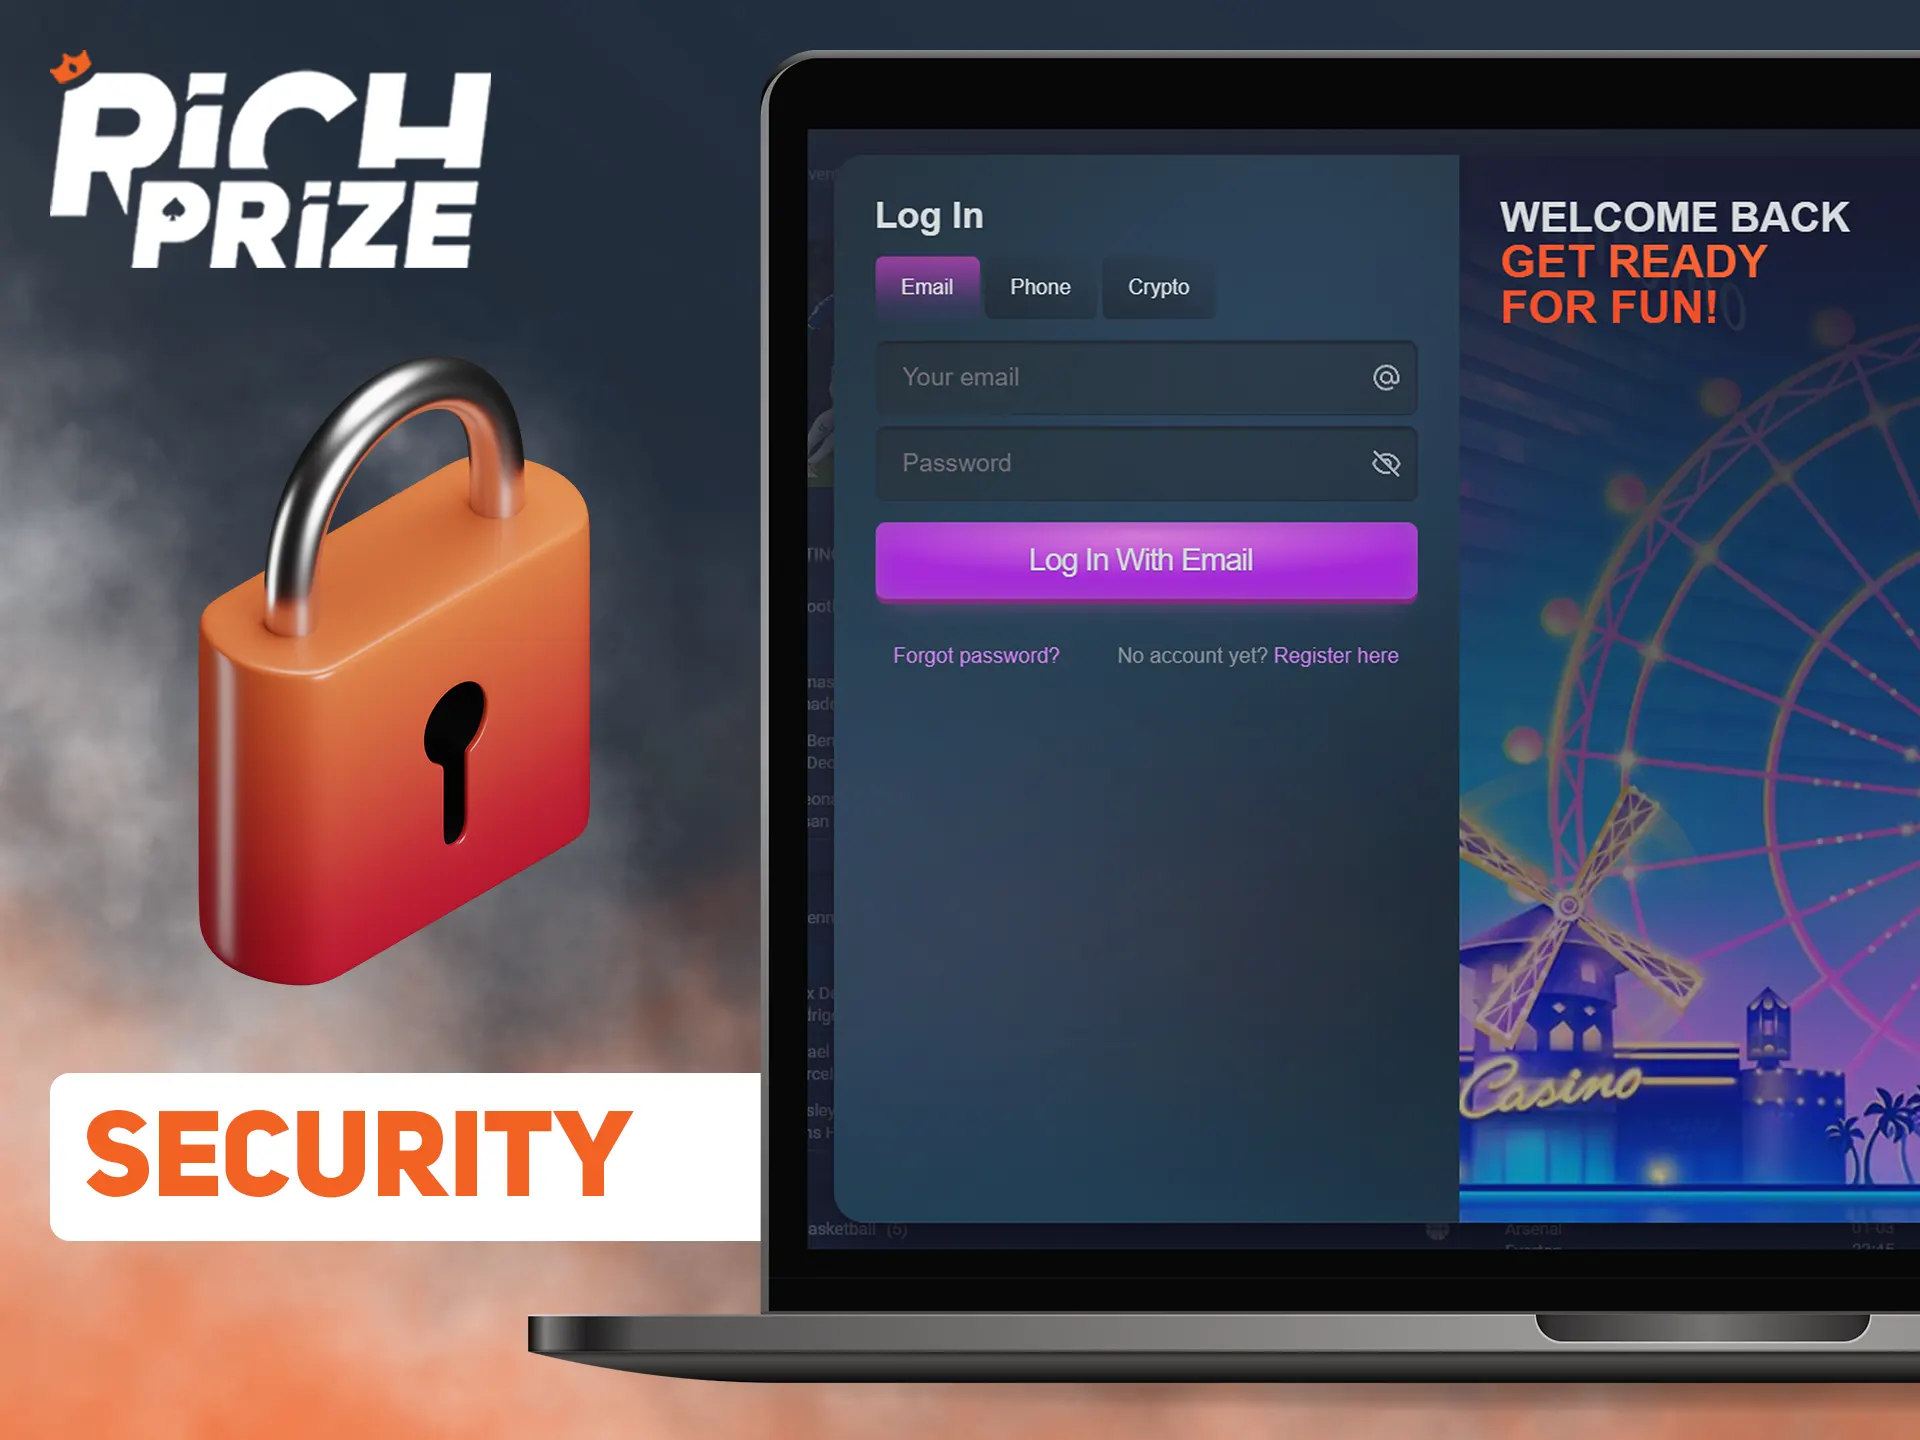 Your information is in safe at Richprize.